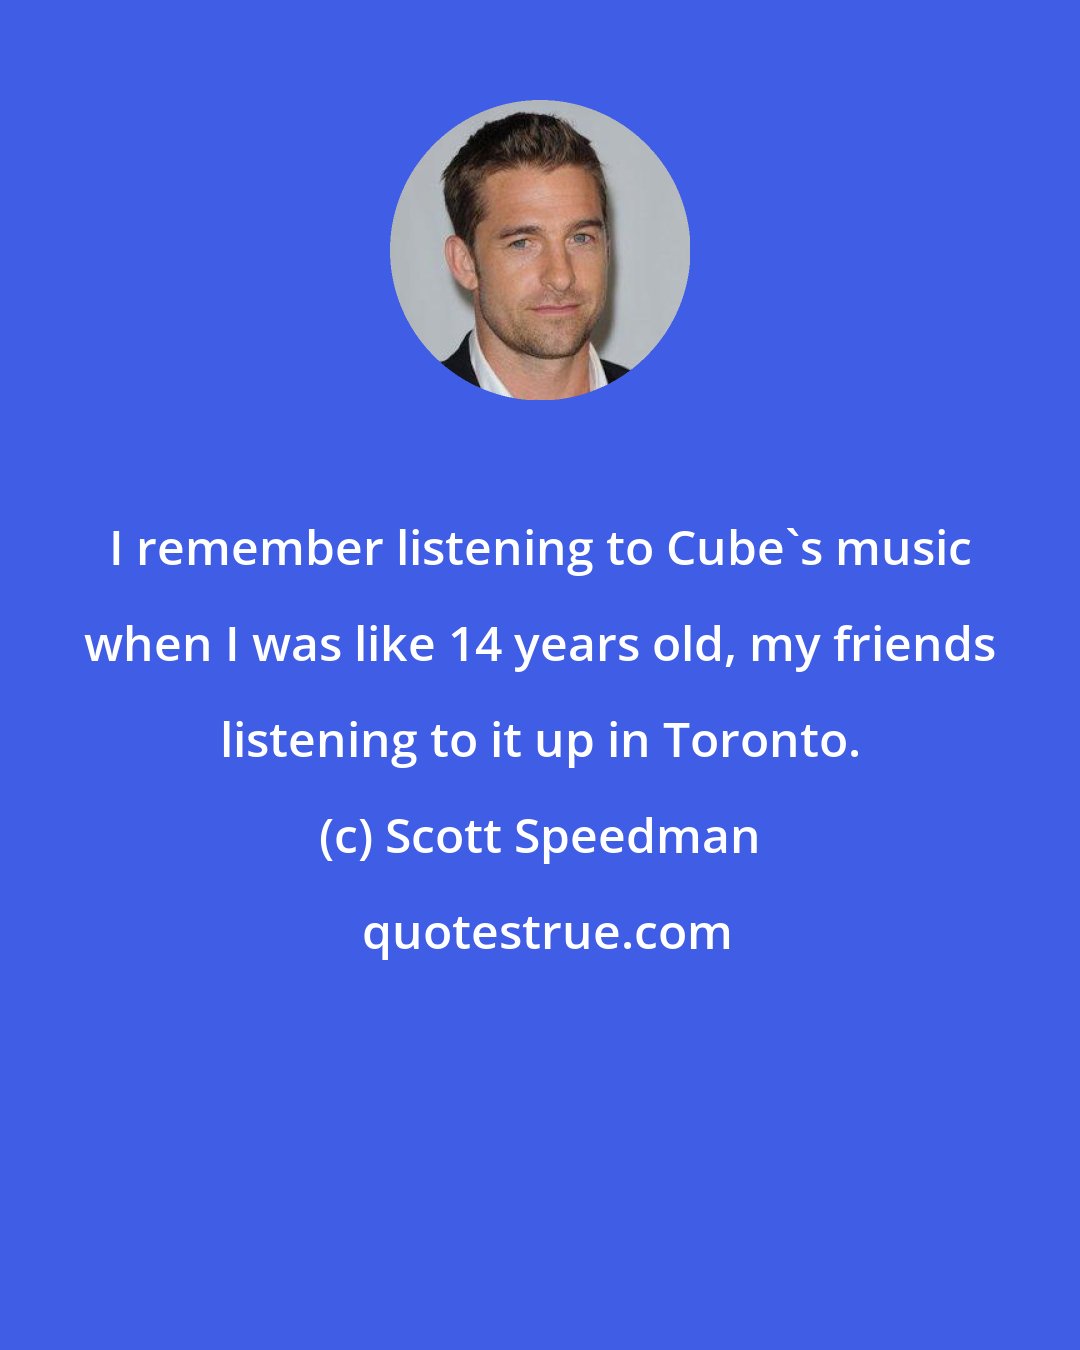 Scott Speedman: I remember listening to Cube's music when I was like 14 years old, my friends listening to it up in Toronto.